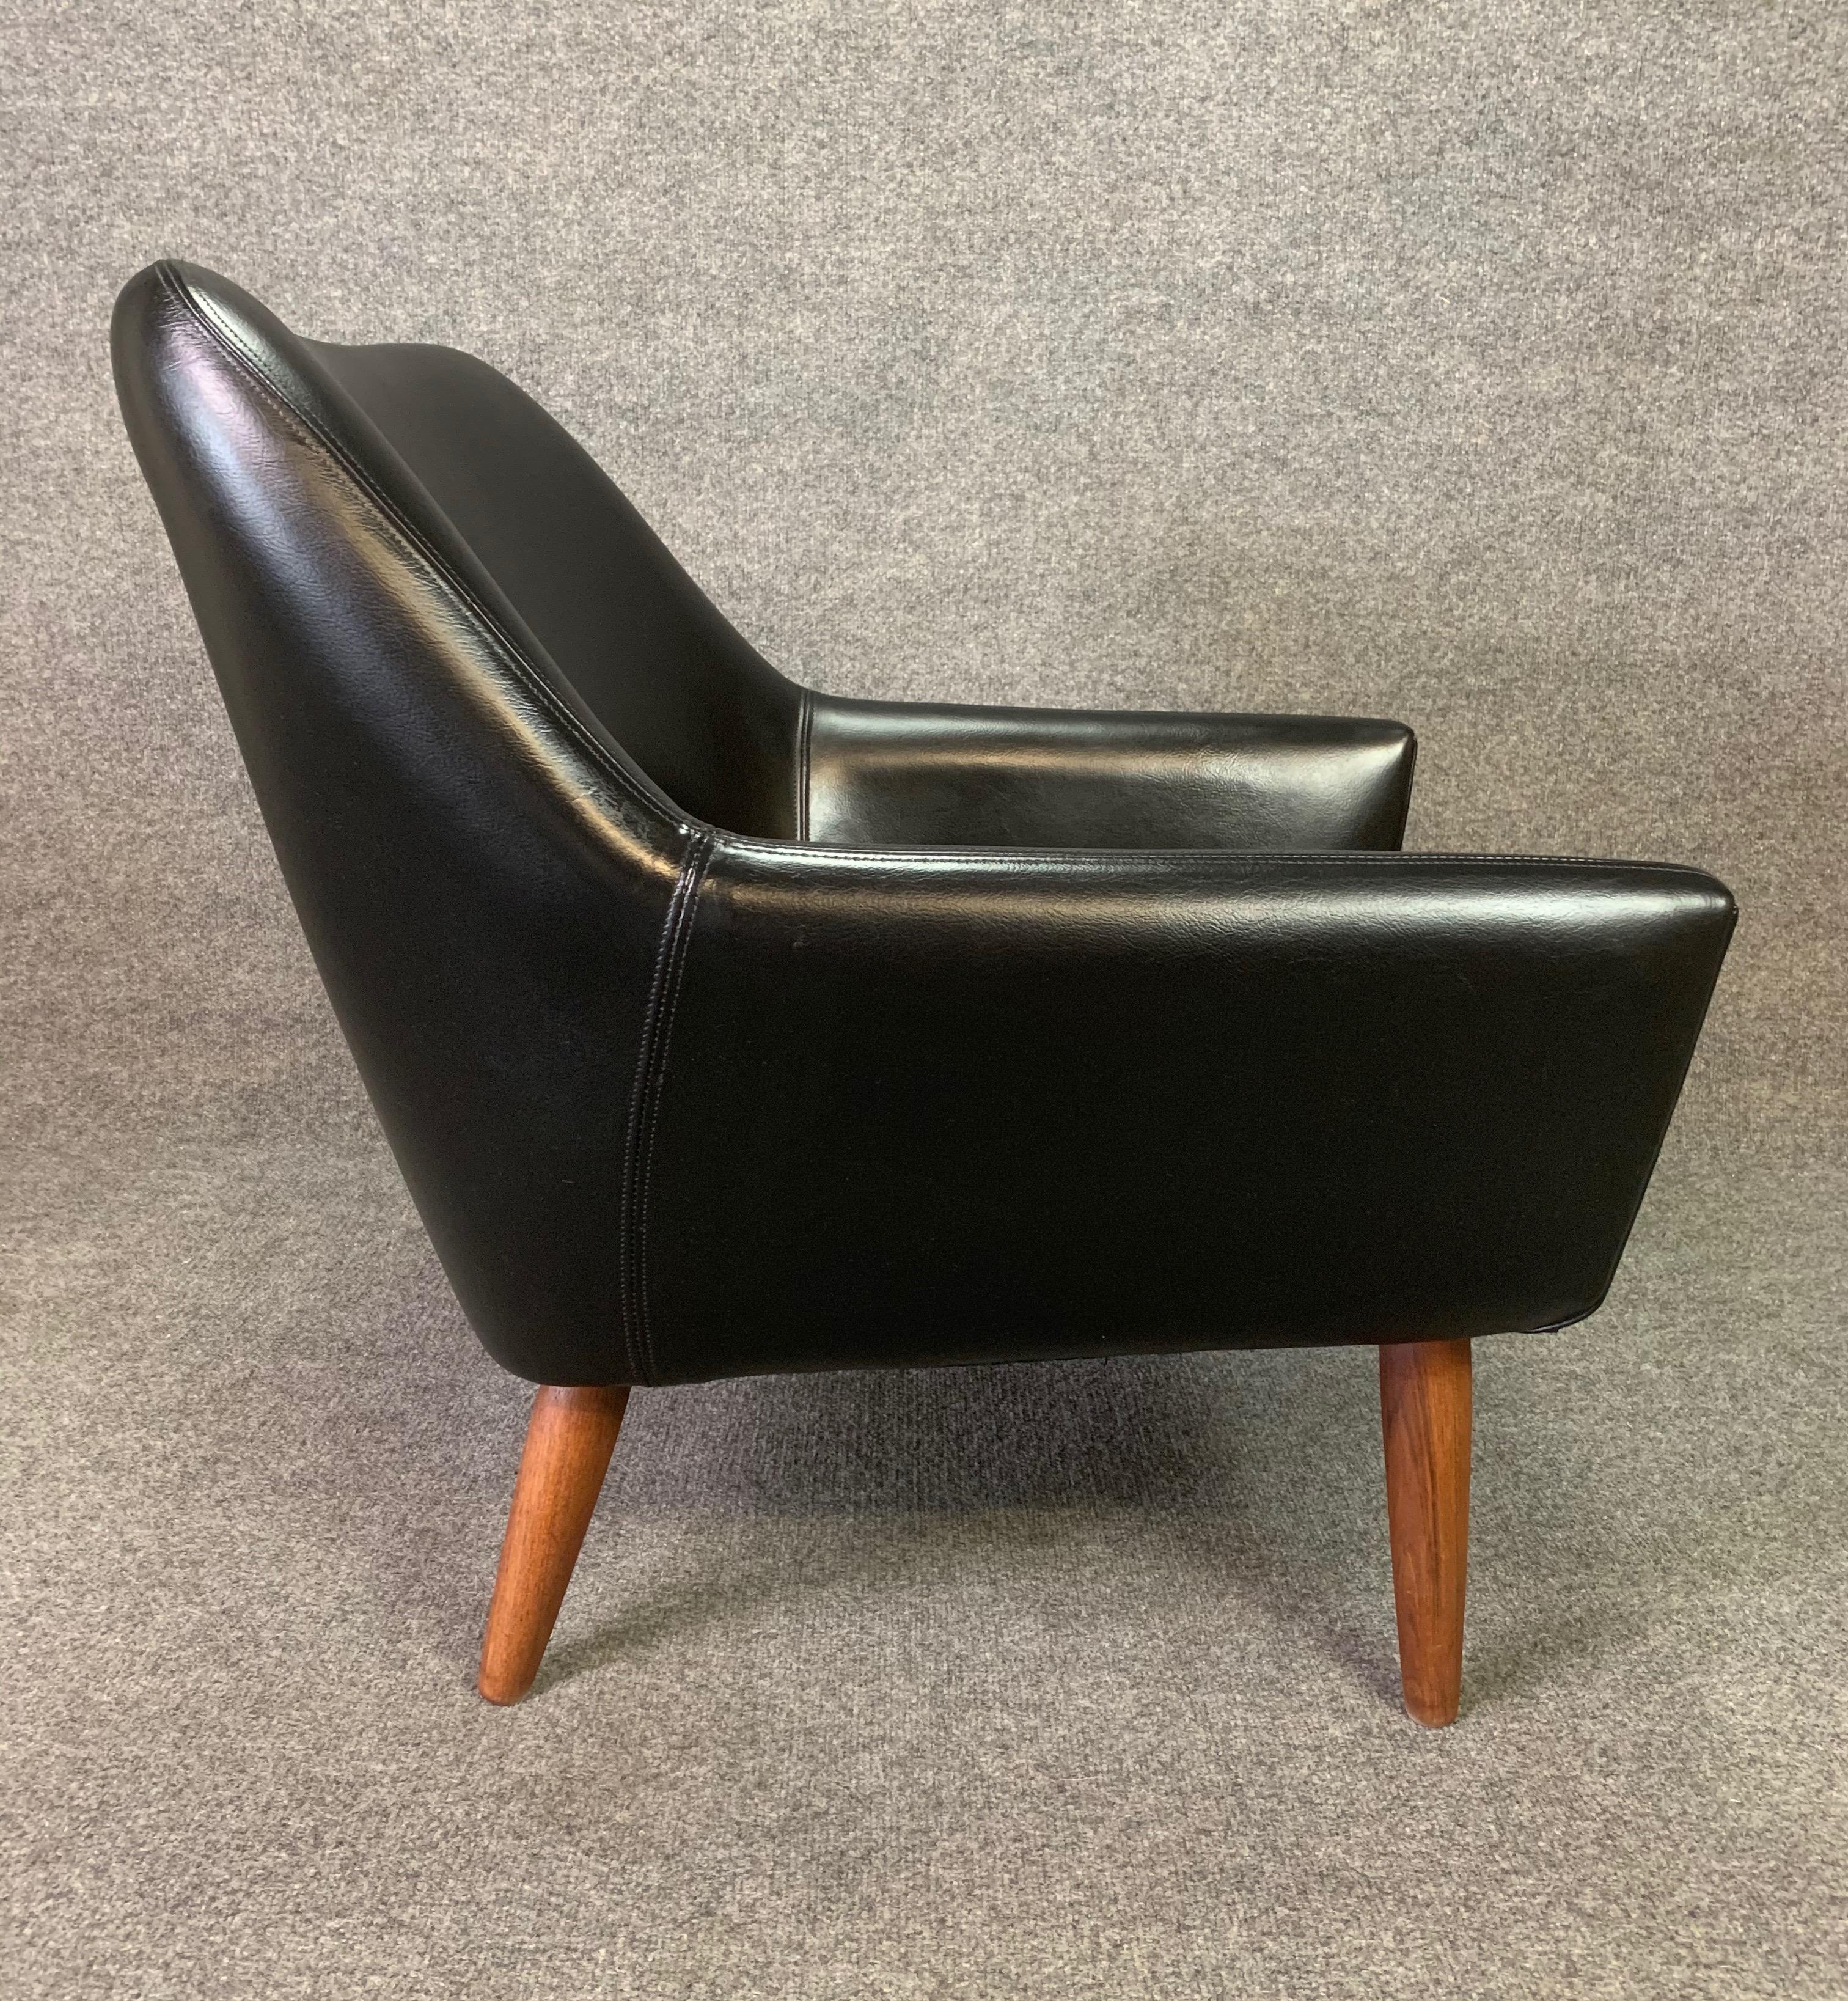 Mid-20th Century Vintage Danish Mid-Century Modern Leather and Teak Lounge Chair For Sale